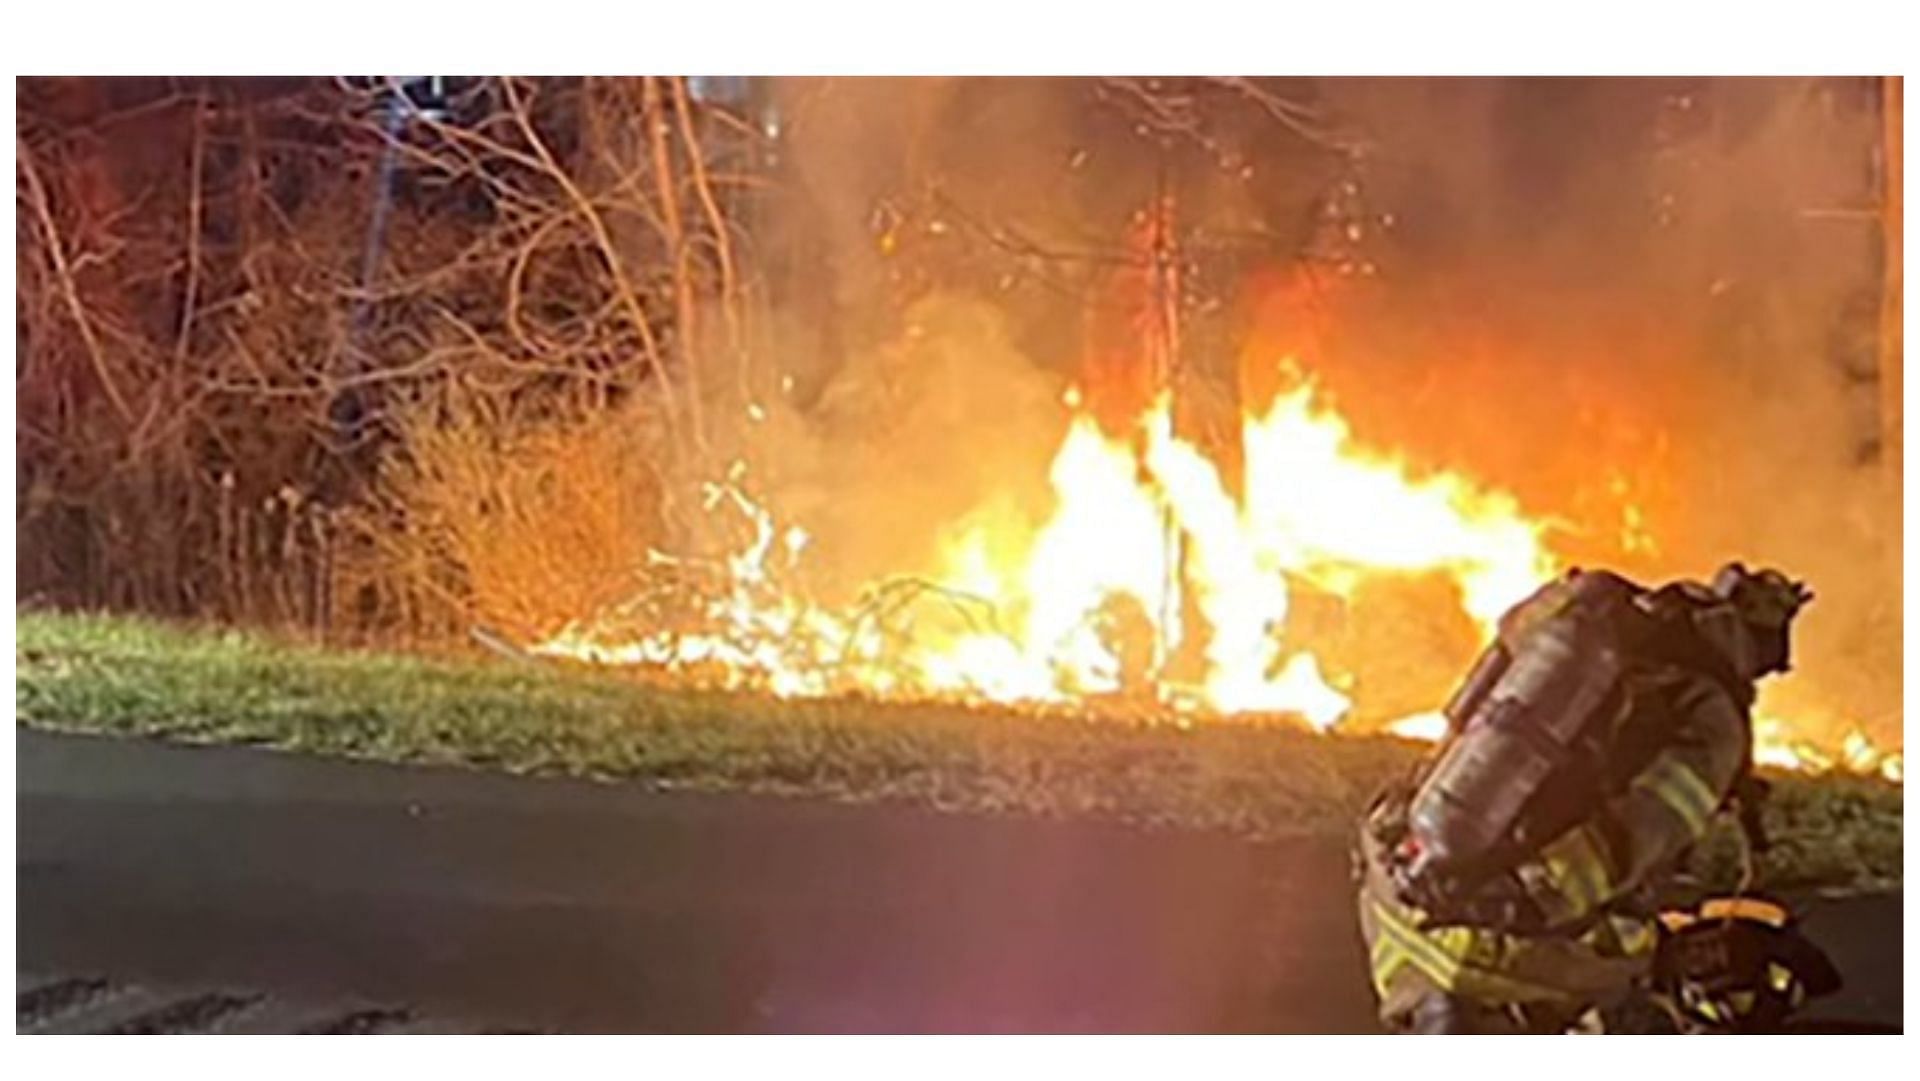 Woman was trapped in a fiery car crash by Route 7, (image via Brought to You/Twitter)